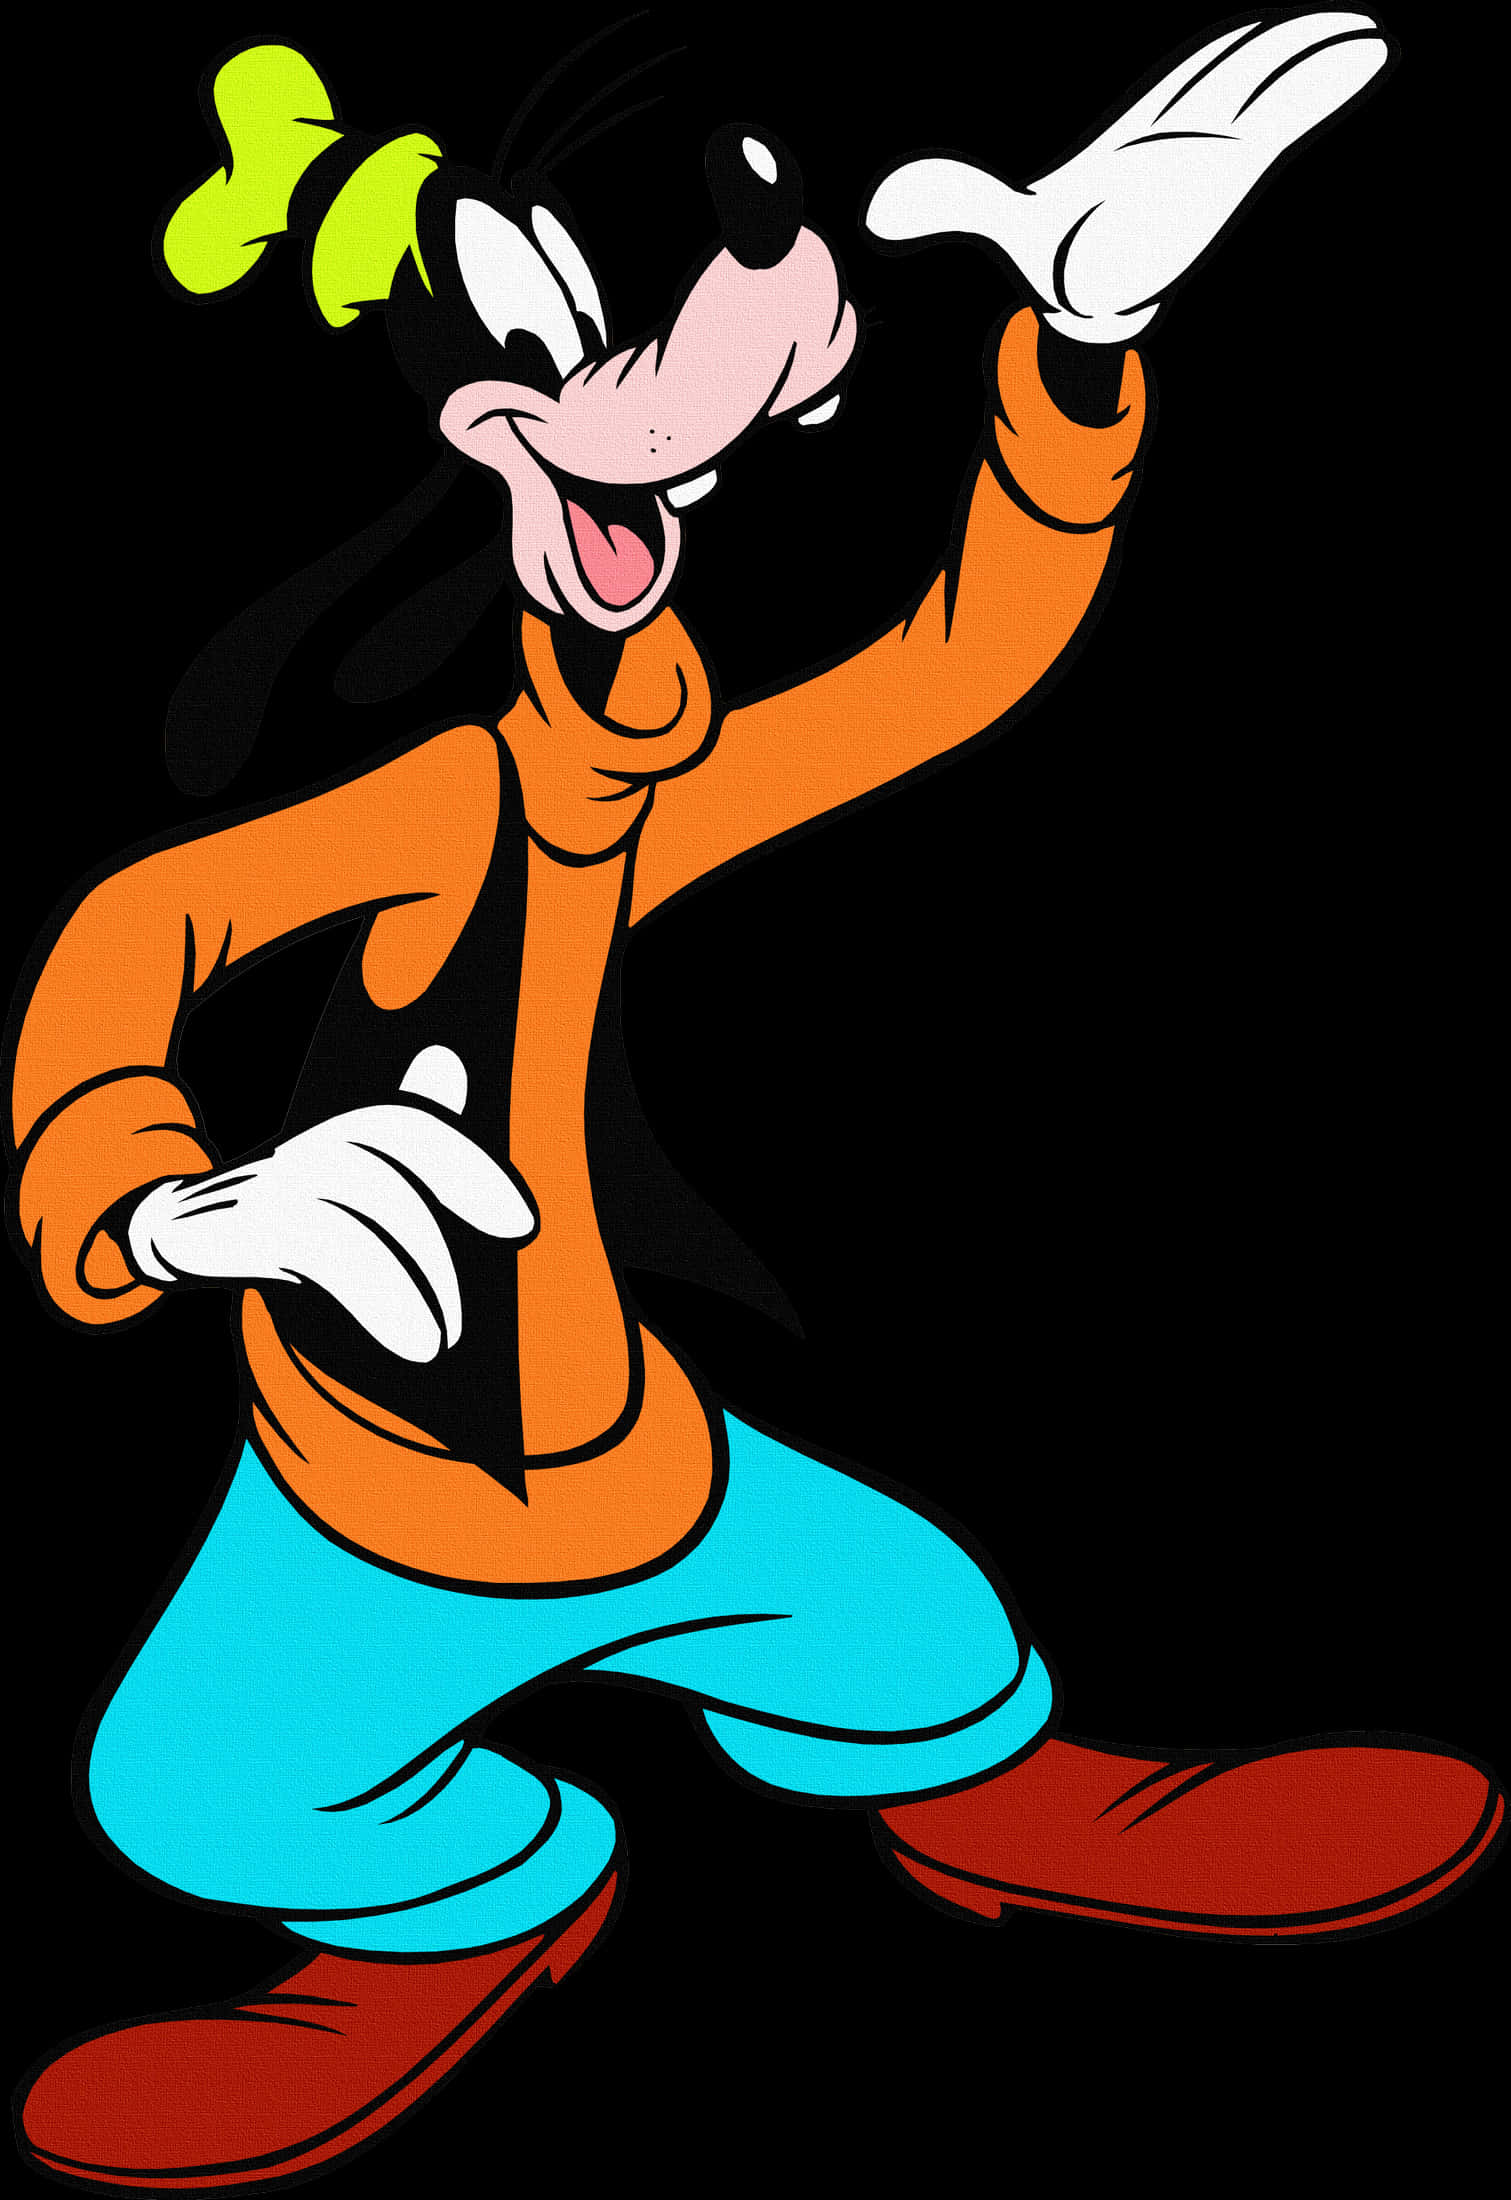 Cartoon Character With A Black Background